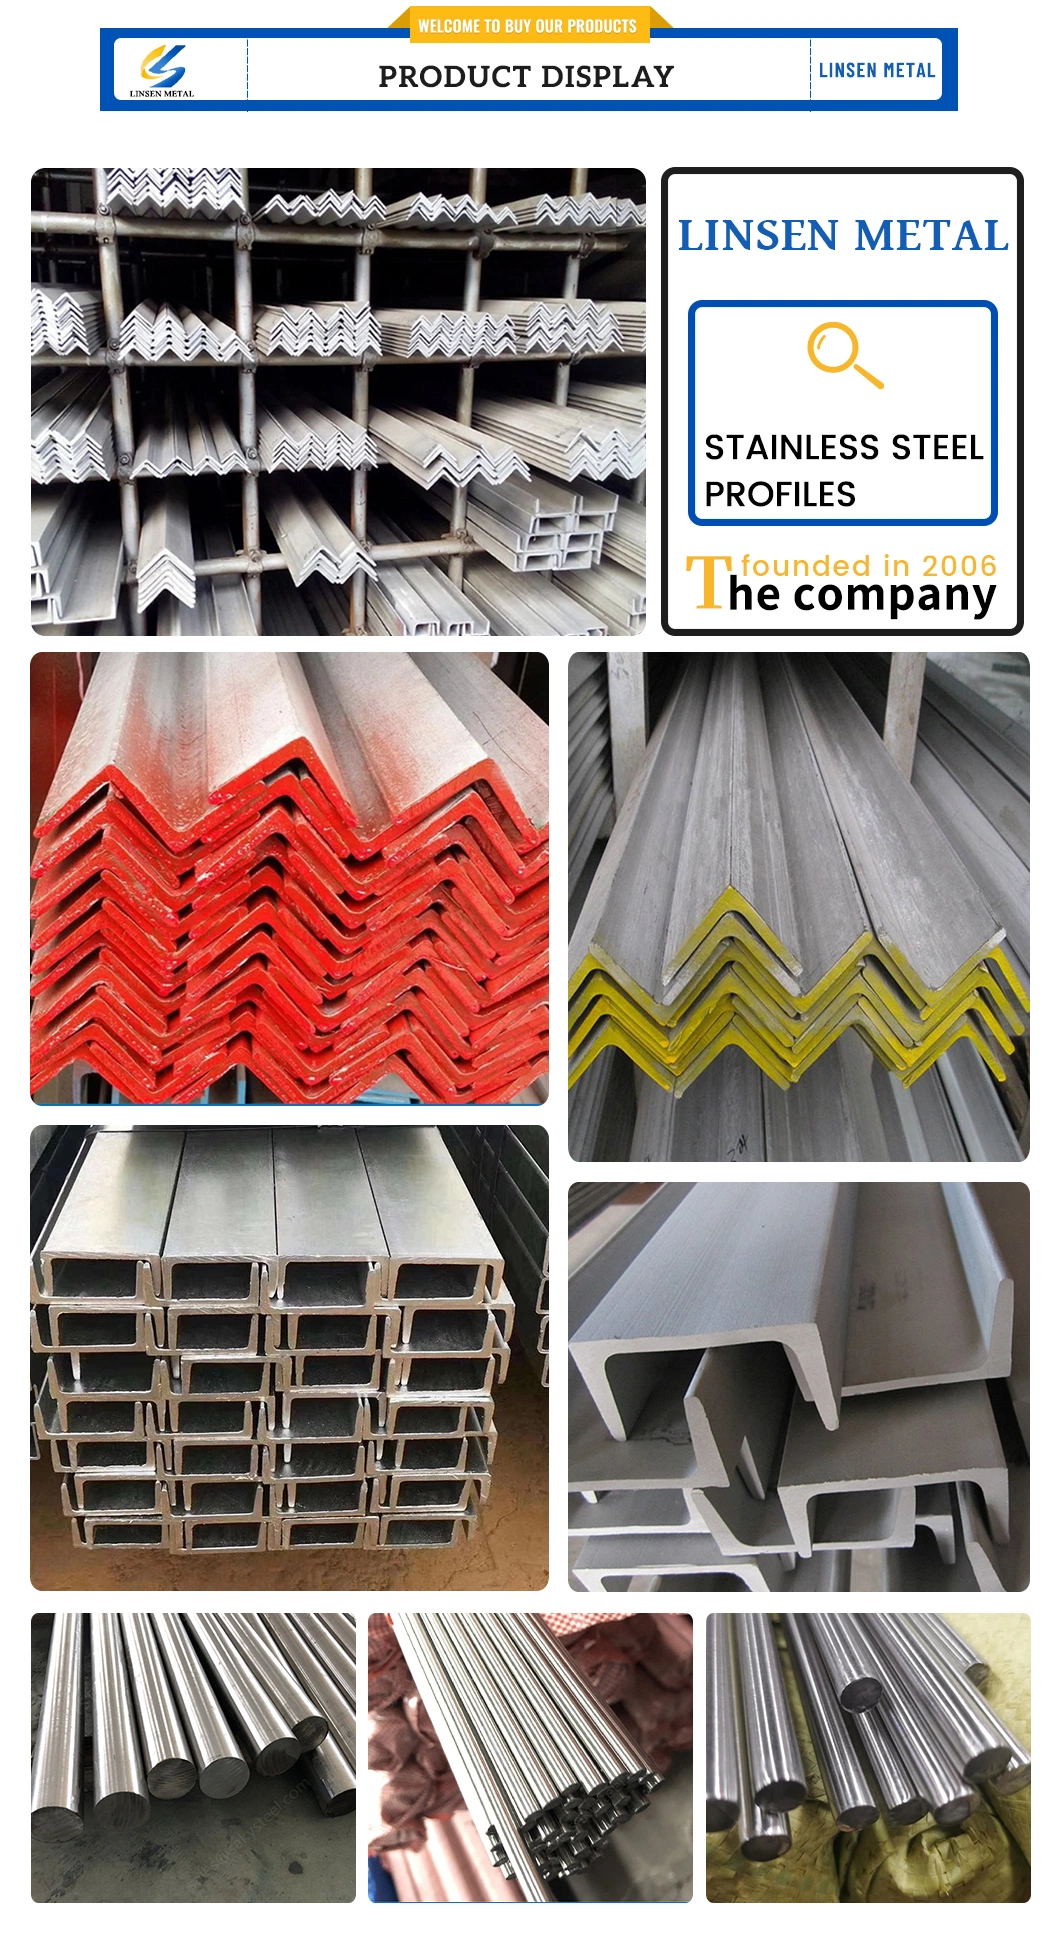 Stainless Steel Bar / Stainless Steel Rod Billets Ss Channel Bar Ss Angle Bar Od60 mm High Quality Customization Available